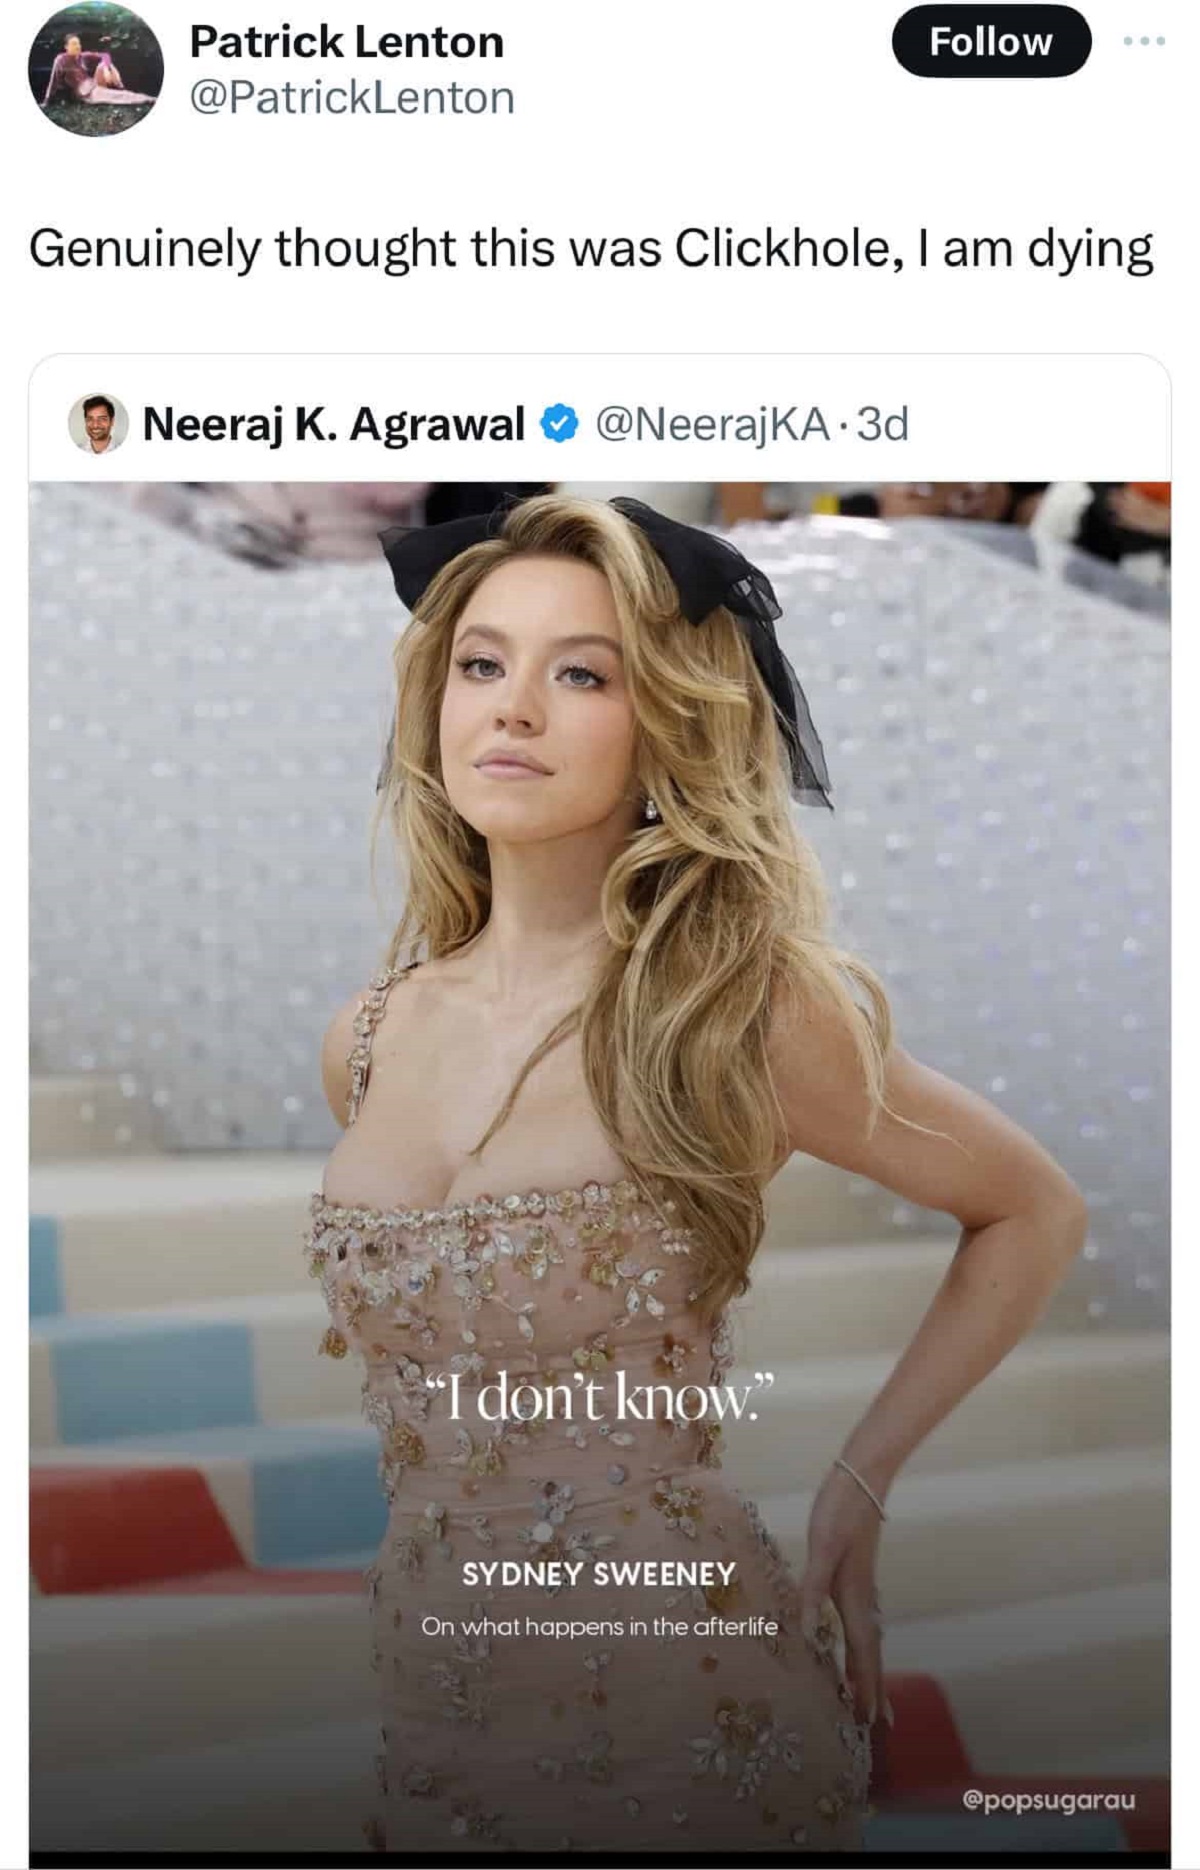 sydney sweeney met gala 2023 - Patrick Lenton Genuinely thought this was Clickhole, I am dying Neeraj K. Agrawal .3d "I don't know." Sydney Sweeney On what happens in the afterlife